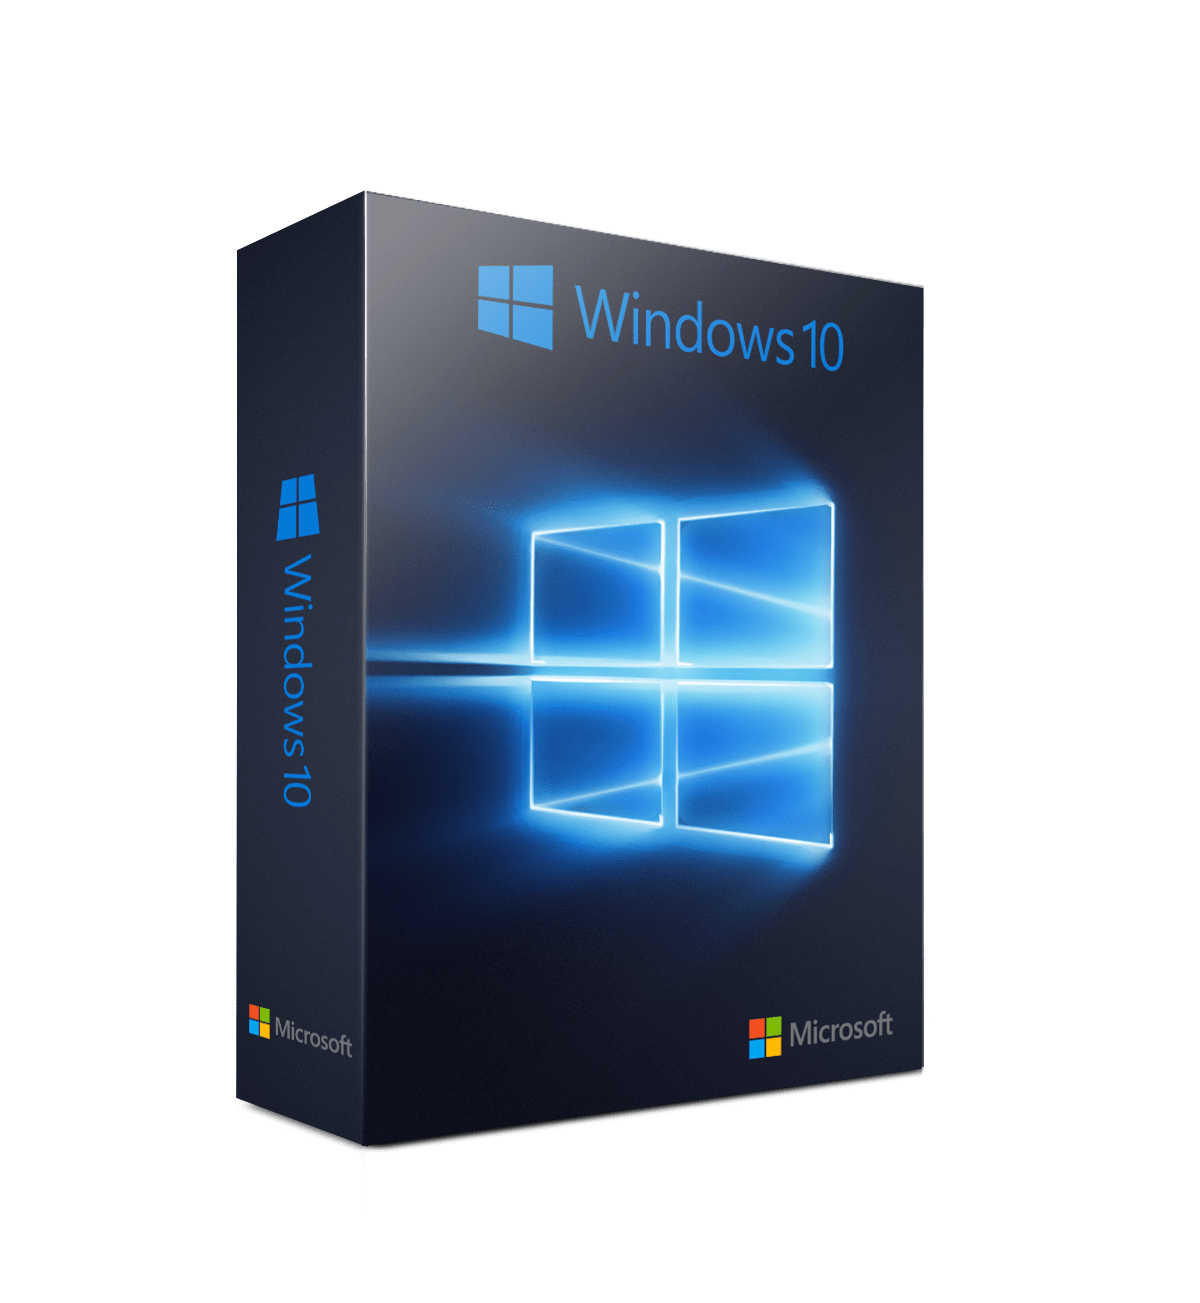 windows 10 pro 1809 iso download from microsoft